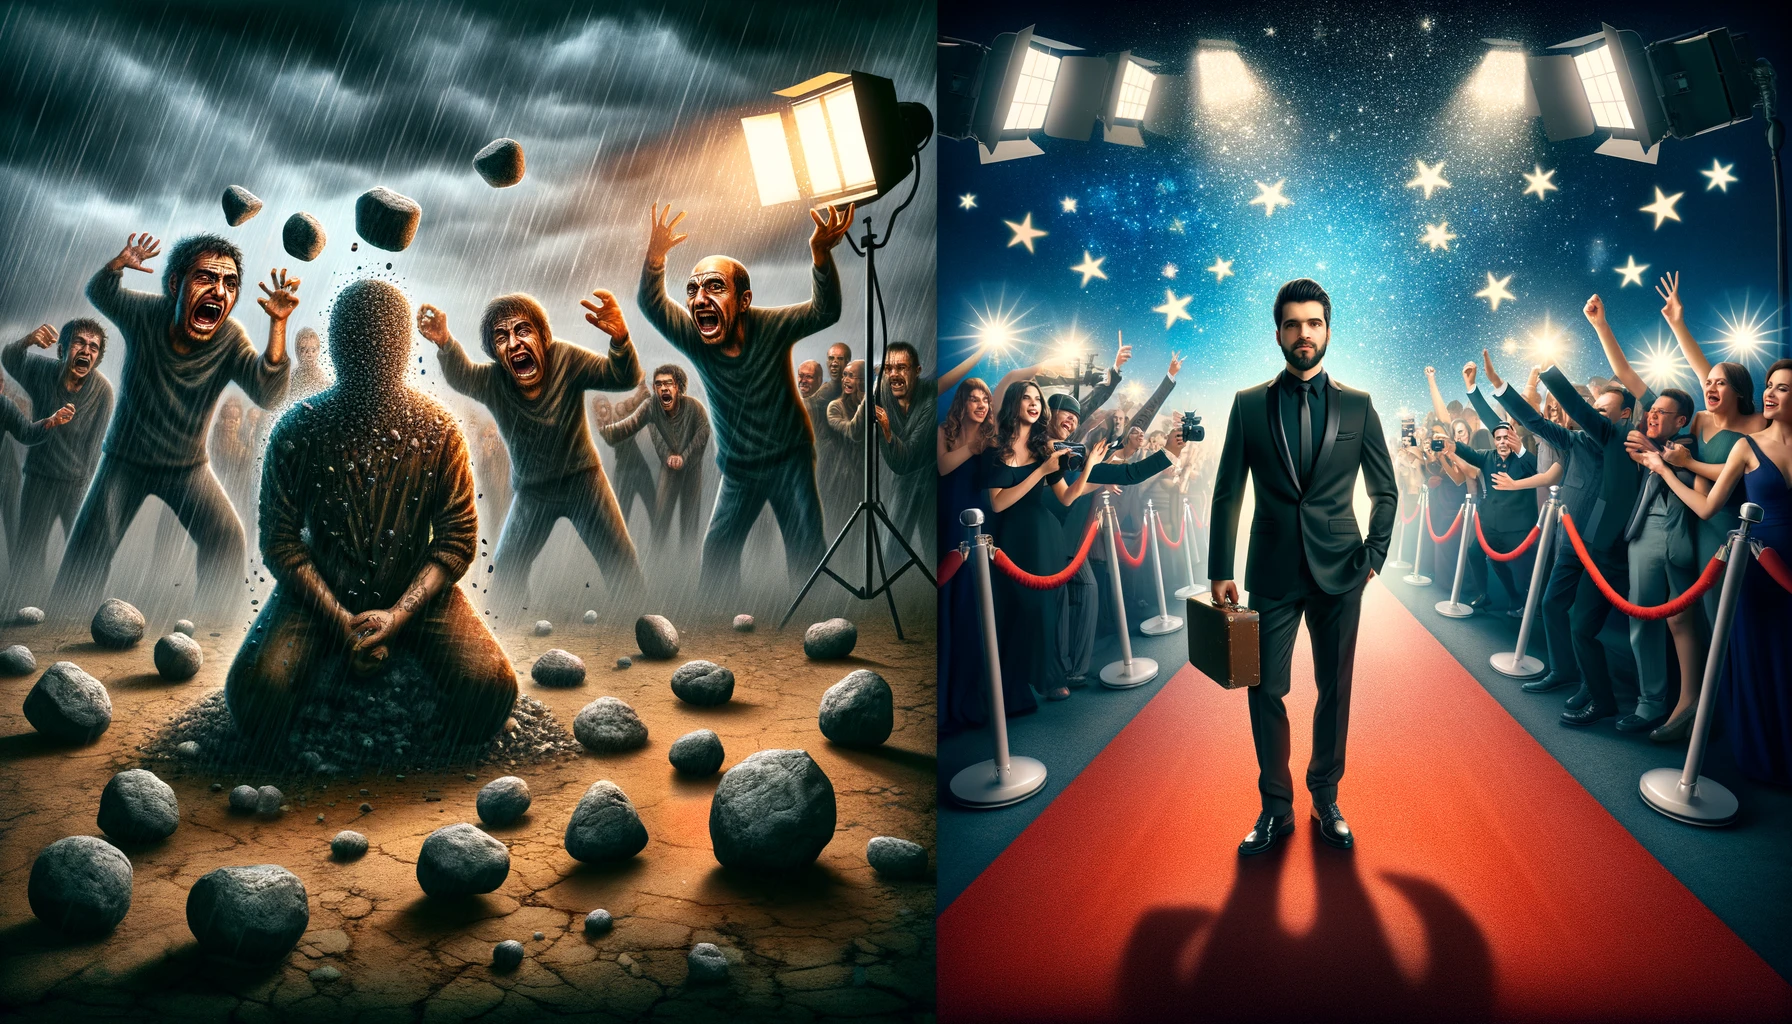 A set of two images illustrating the transformation of an actor from being scorned to celebrated. The first image shows the actor on a somber film set, being metaphorically pelted with stones by an angry crowd, symbolizing harsh criticism and rejection. The background is dark and stormy, enhancing the mood of adversity. The second image shows the same actor on a glamorous red carpet, now a celebrated star, surrounded by adoring fans and flashing camera lights. The background is vibrant and festive, symbolizing success and acceptance.